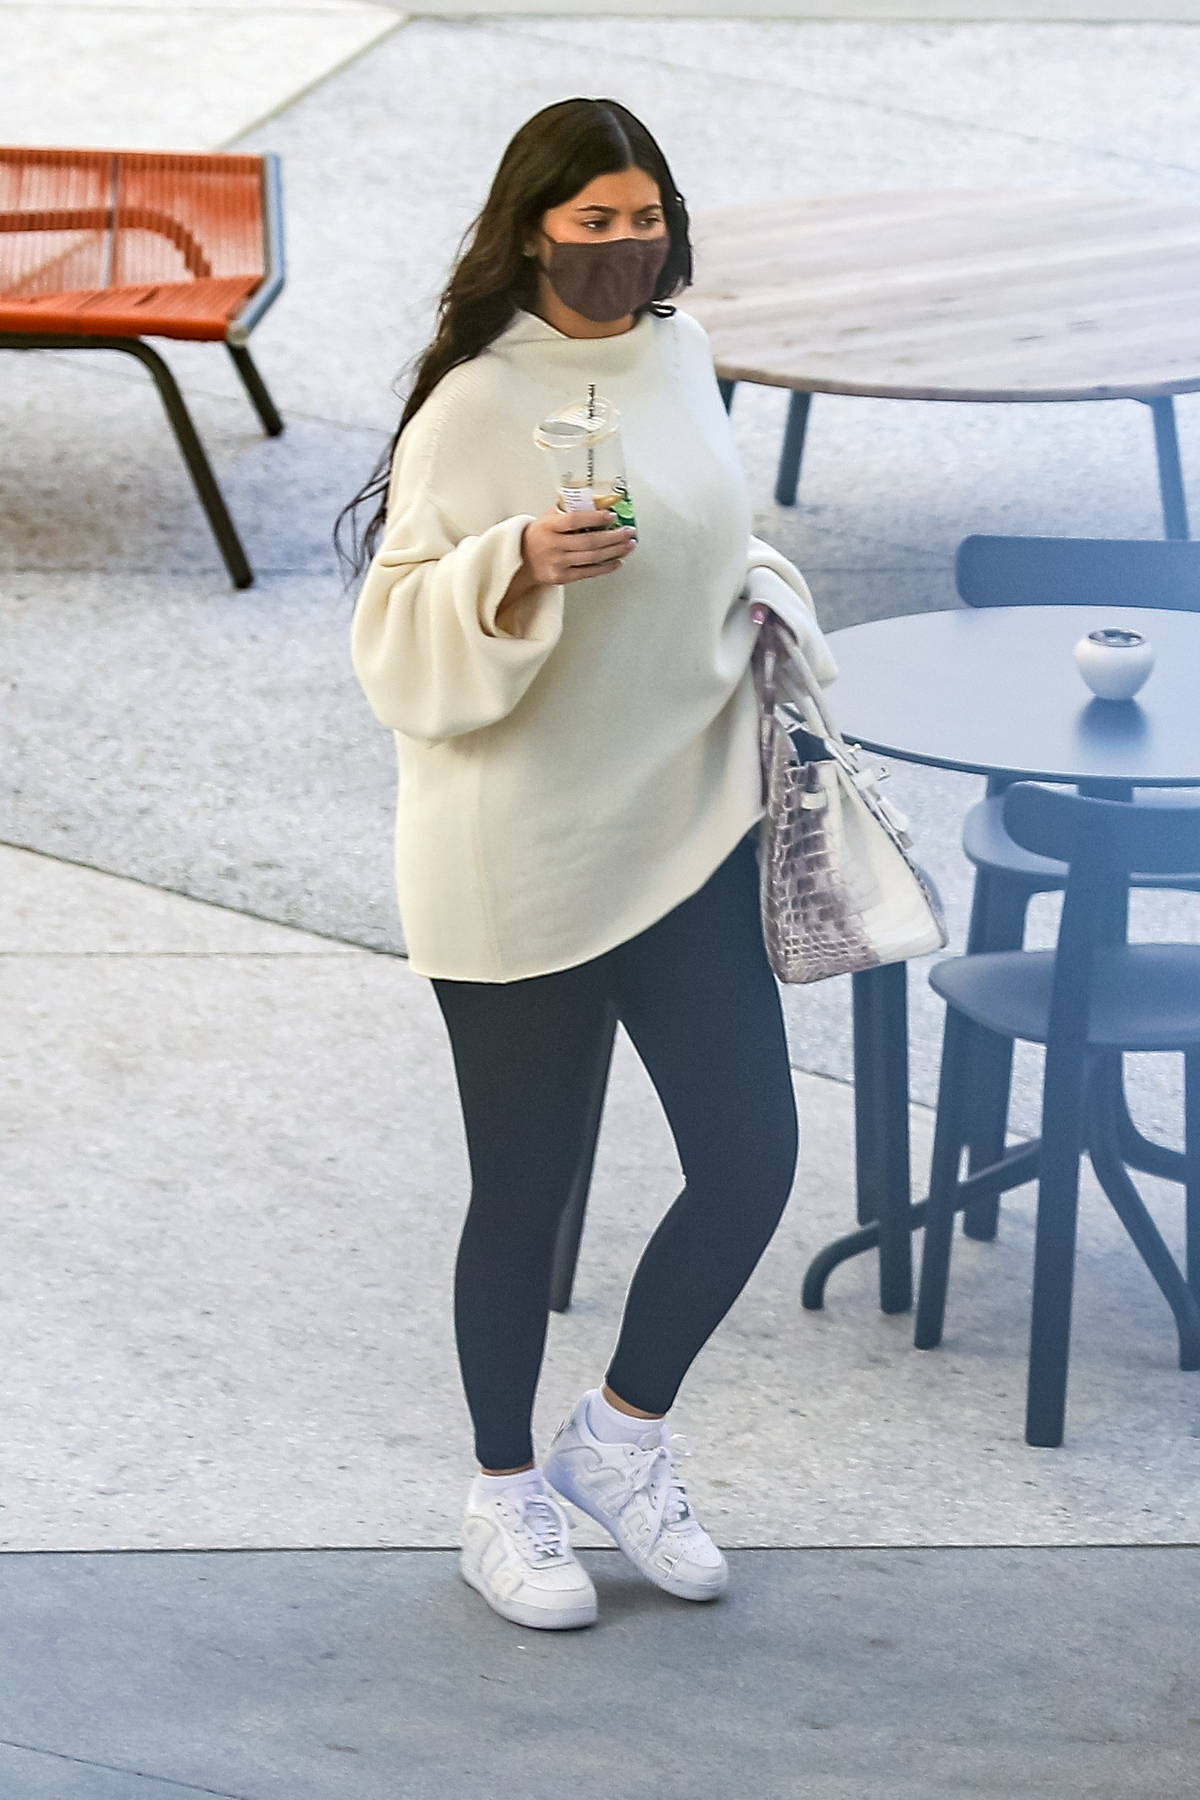 Kylie Jenner keeps it cozy in an oversized sweater and leggings